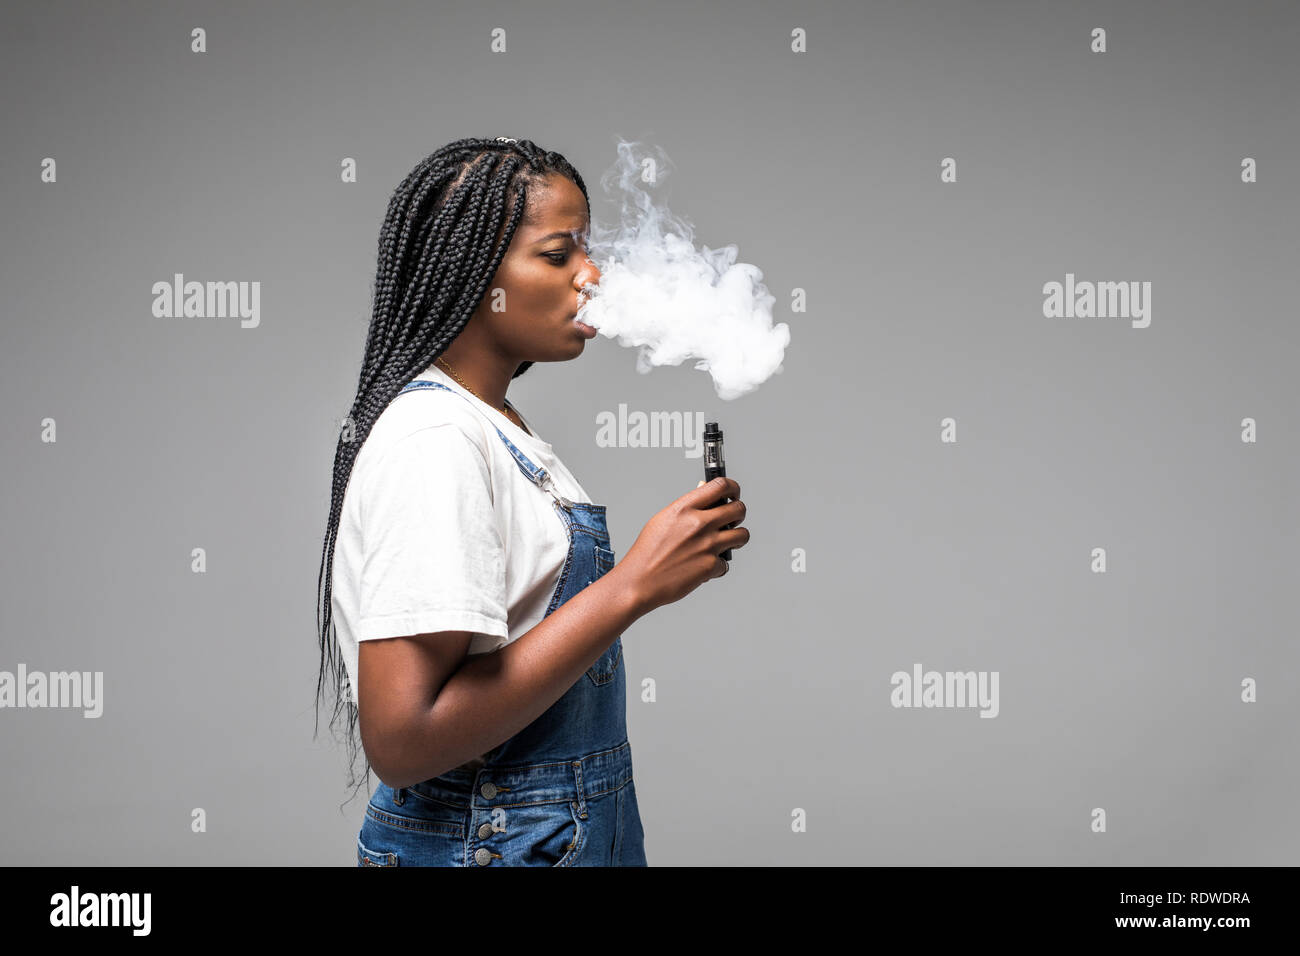 Side view portrait of guy holding vape device and exhaling cloud of smoke isolated on blue background. Stock Photo